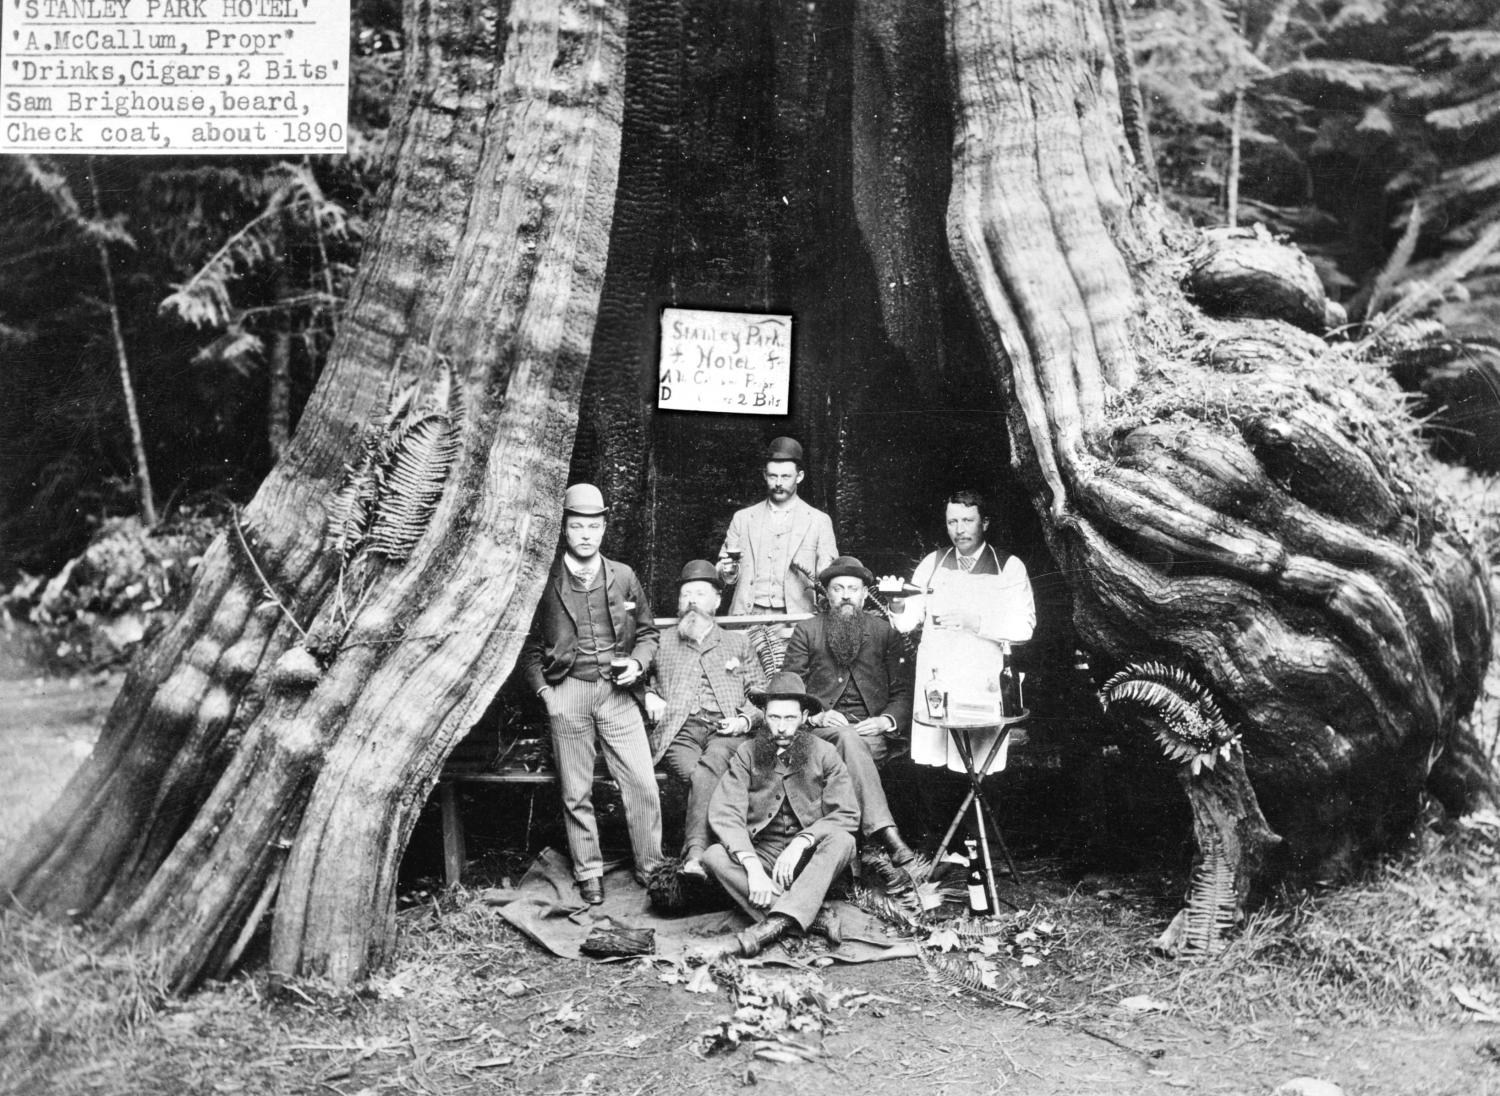 Men posing for a silly photo in the “Stanley Park Hotel,”  otherwise known as Stanley Park’s famous Hollow Tree.